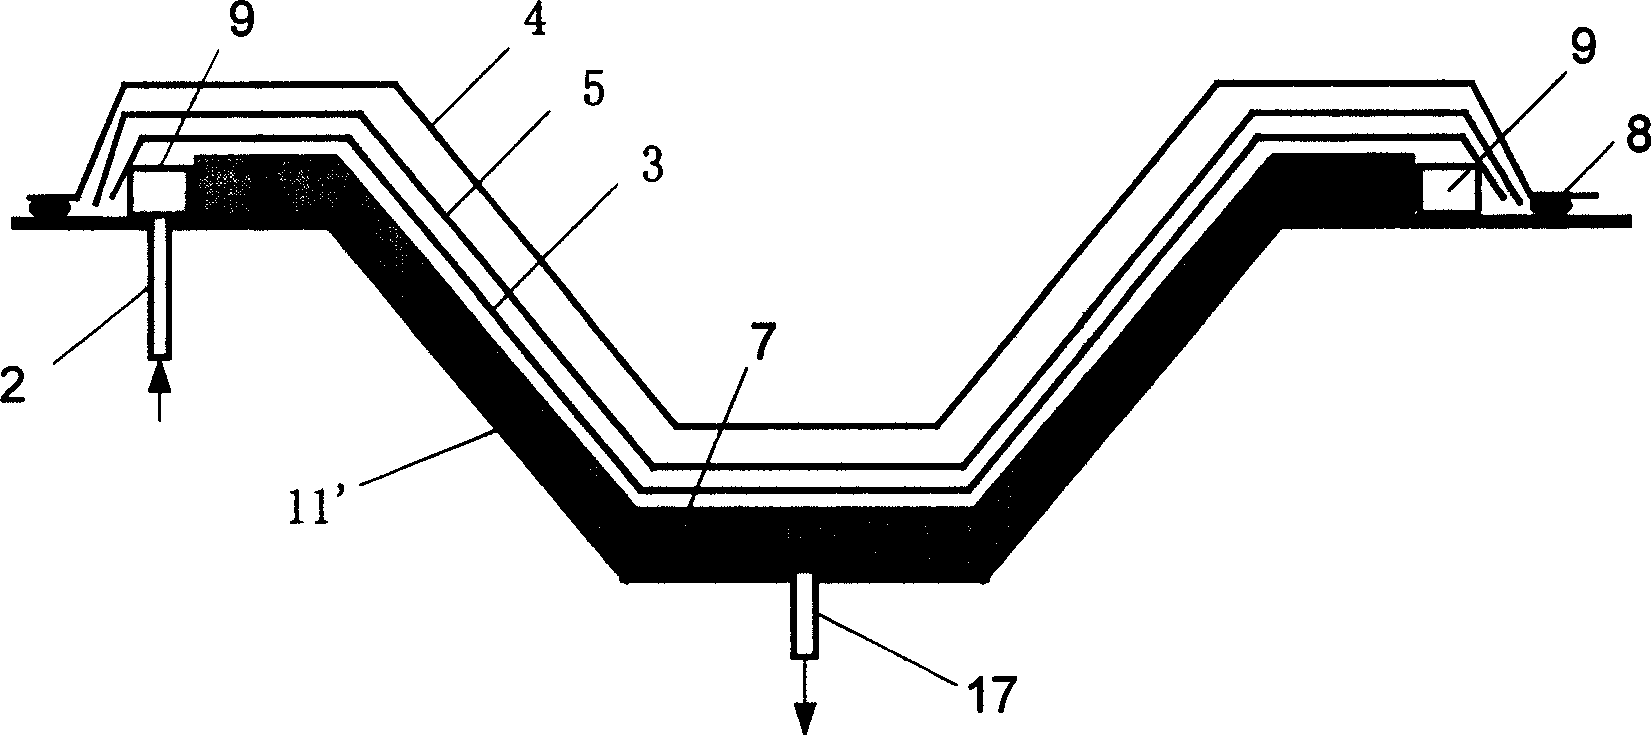 Method for fabricating non-woven fabric from flax and composite material